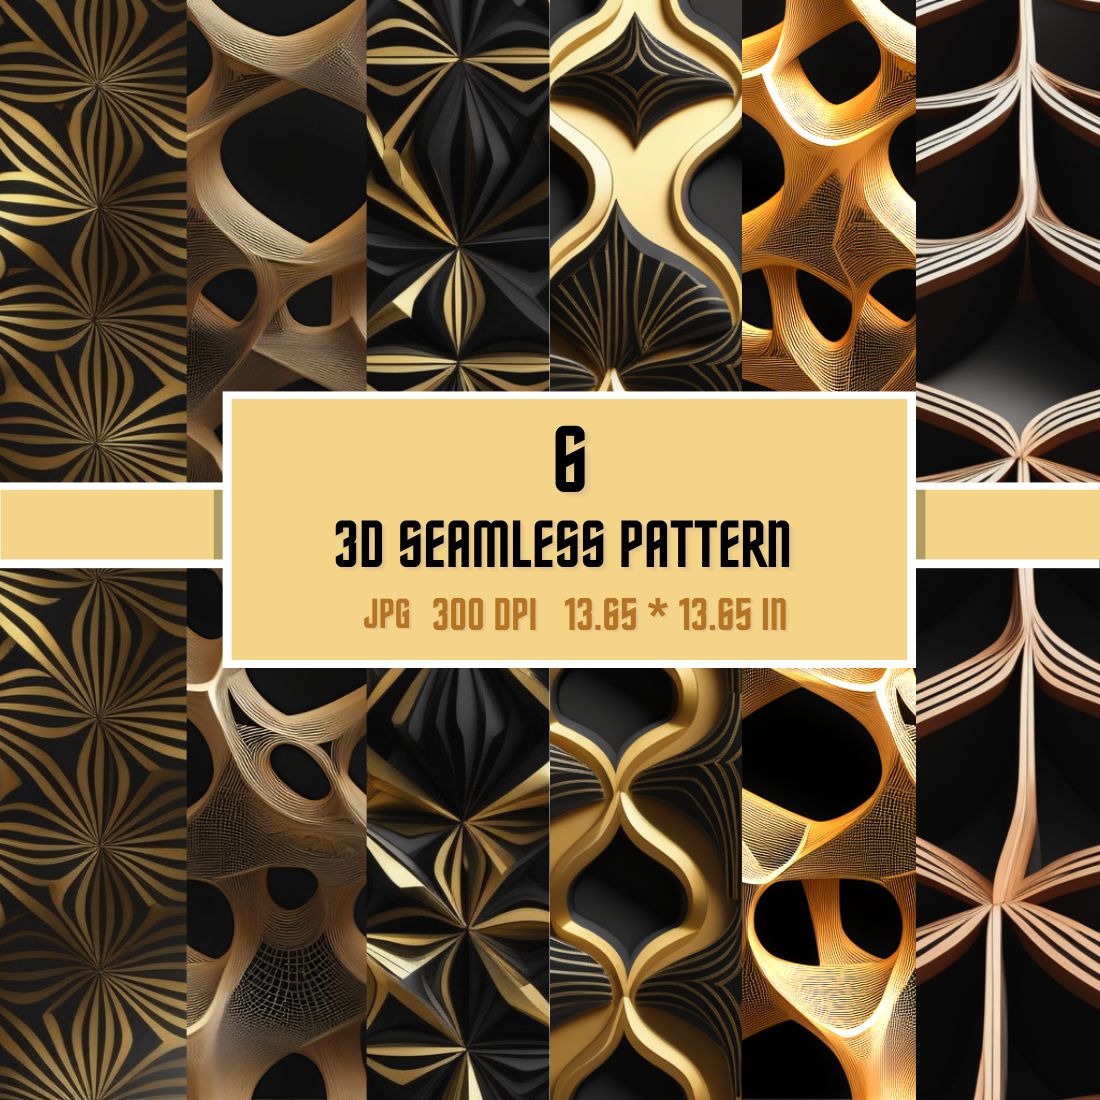 3D seamless pattern, Digital paper - Fusion of nature & technology cover image.